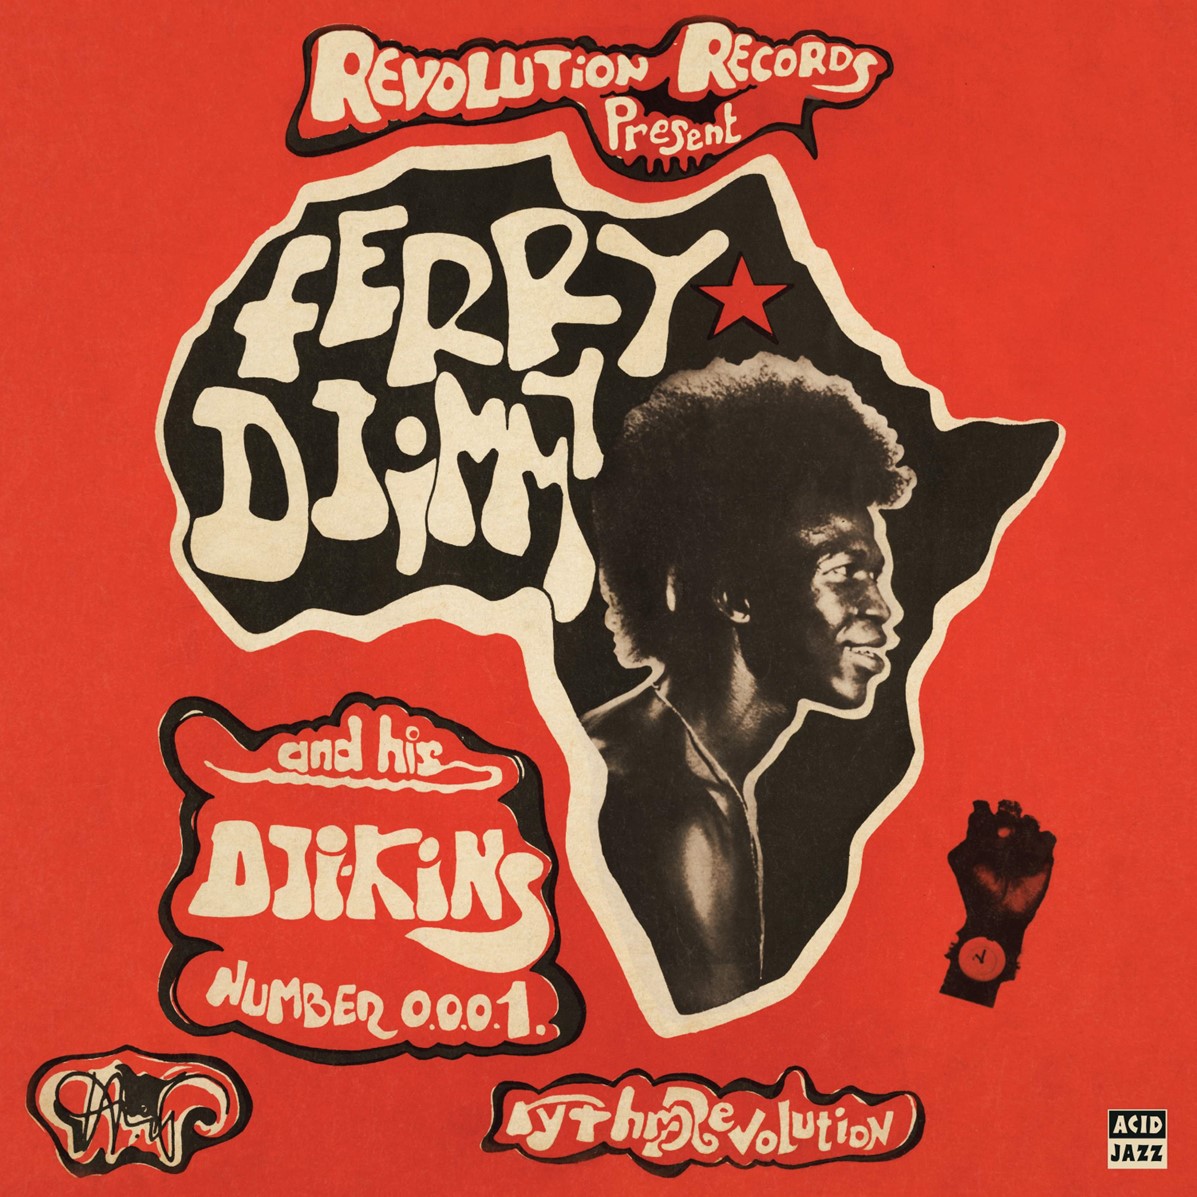 Acid Jazz announces the release of Ferry Djimmy’s 'Rhythm Revolution' - out on July 1st 